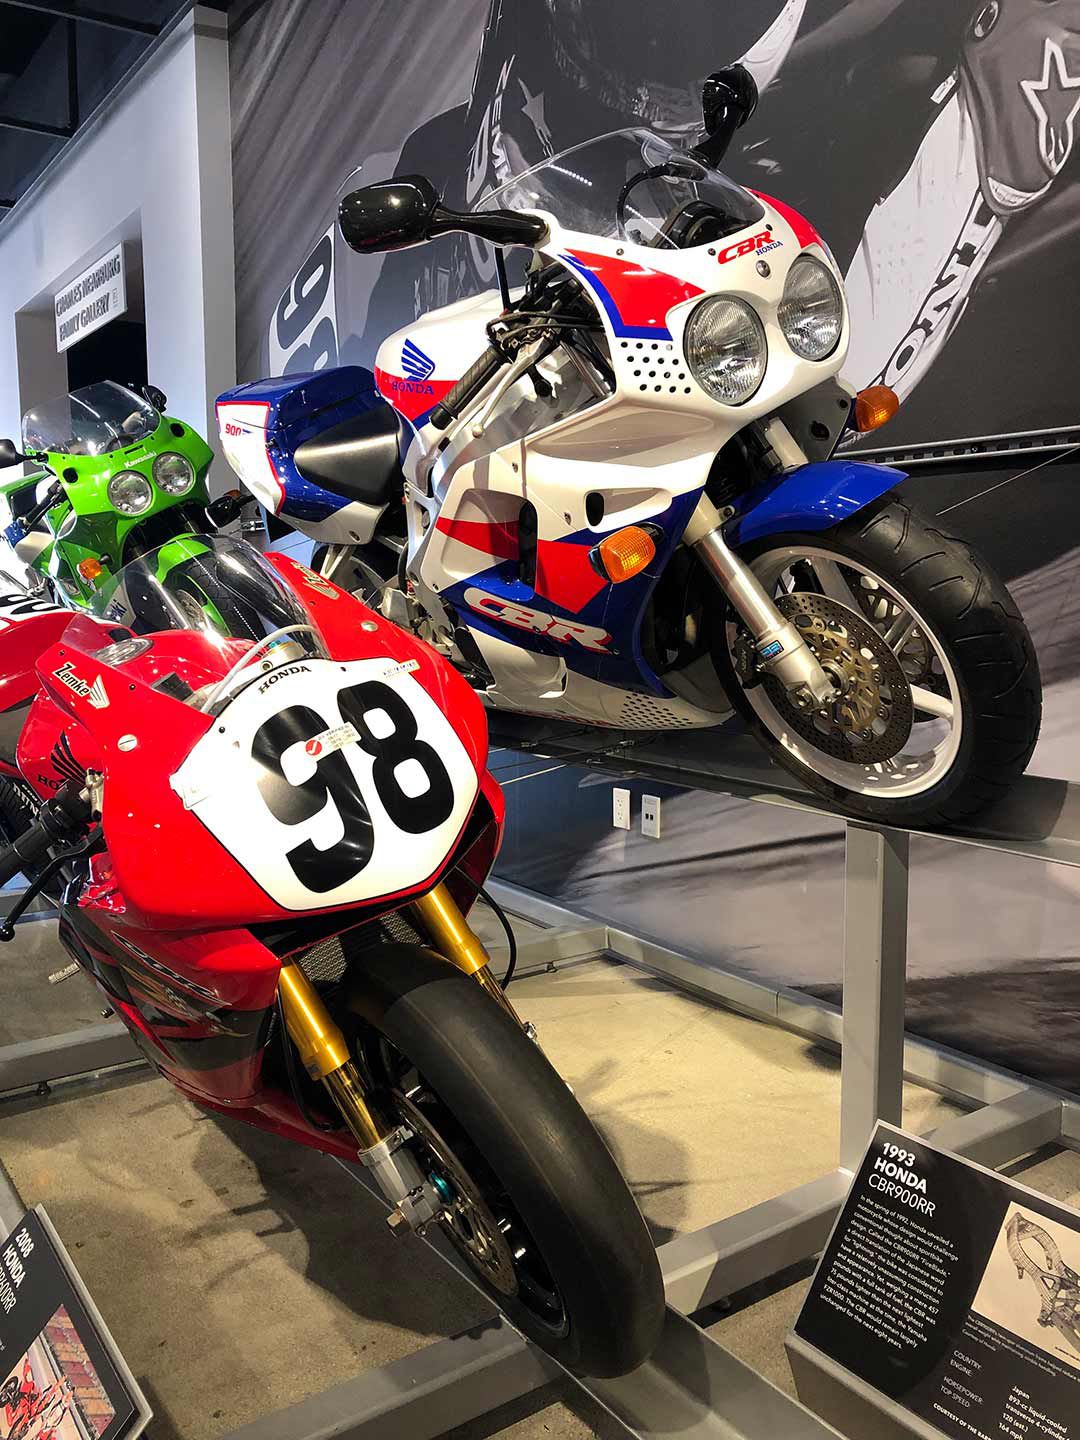 A pair of rockets looking to take off. Honda’s boundary-breaking production 1993 CBR900RR Fireblade, with Jake Zemke’s 2008 Honda CBR600RR racer below.